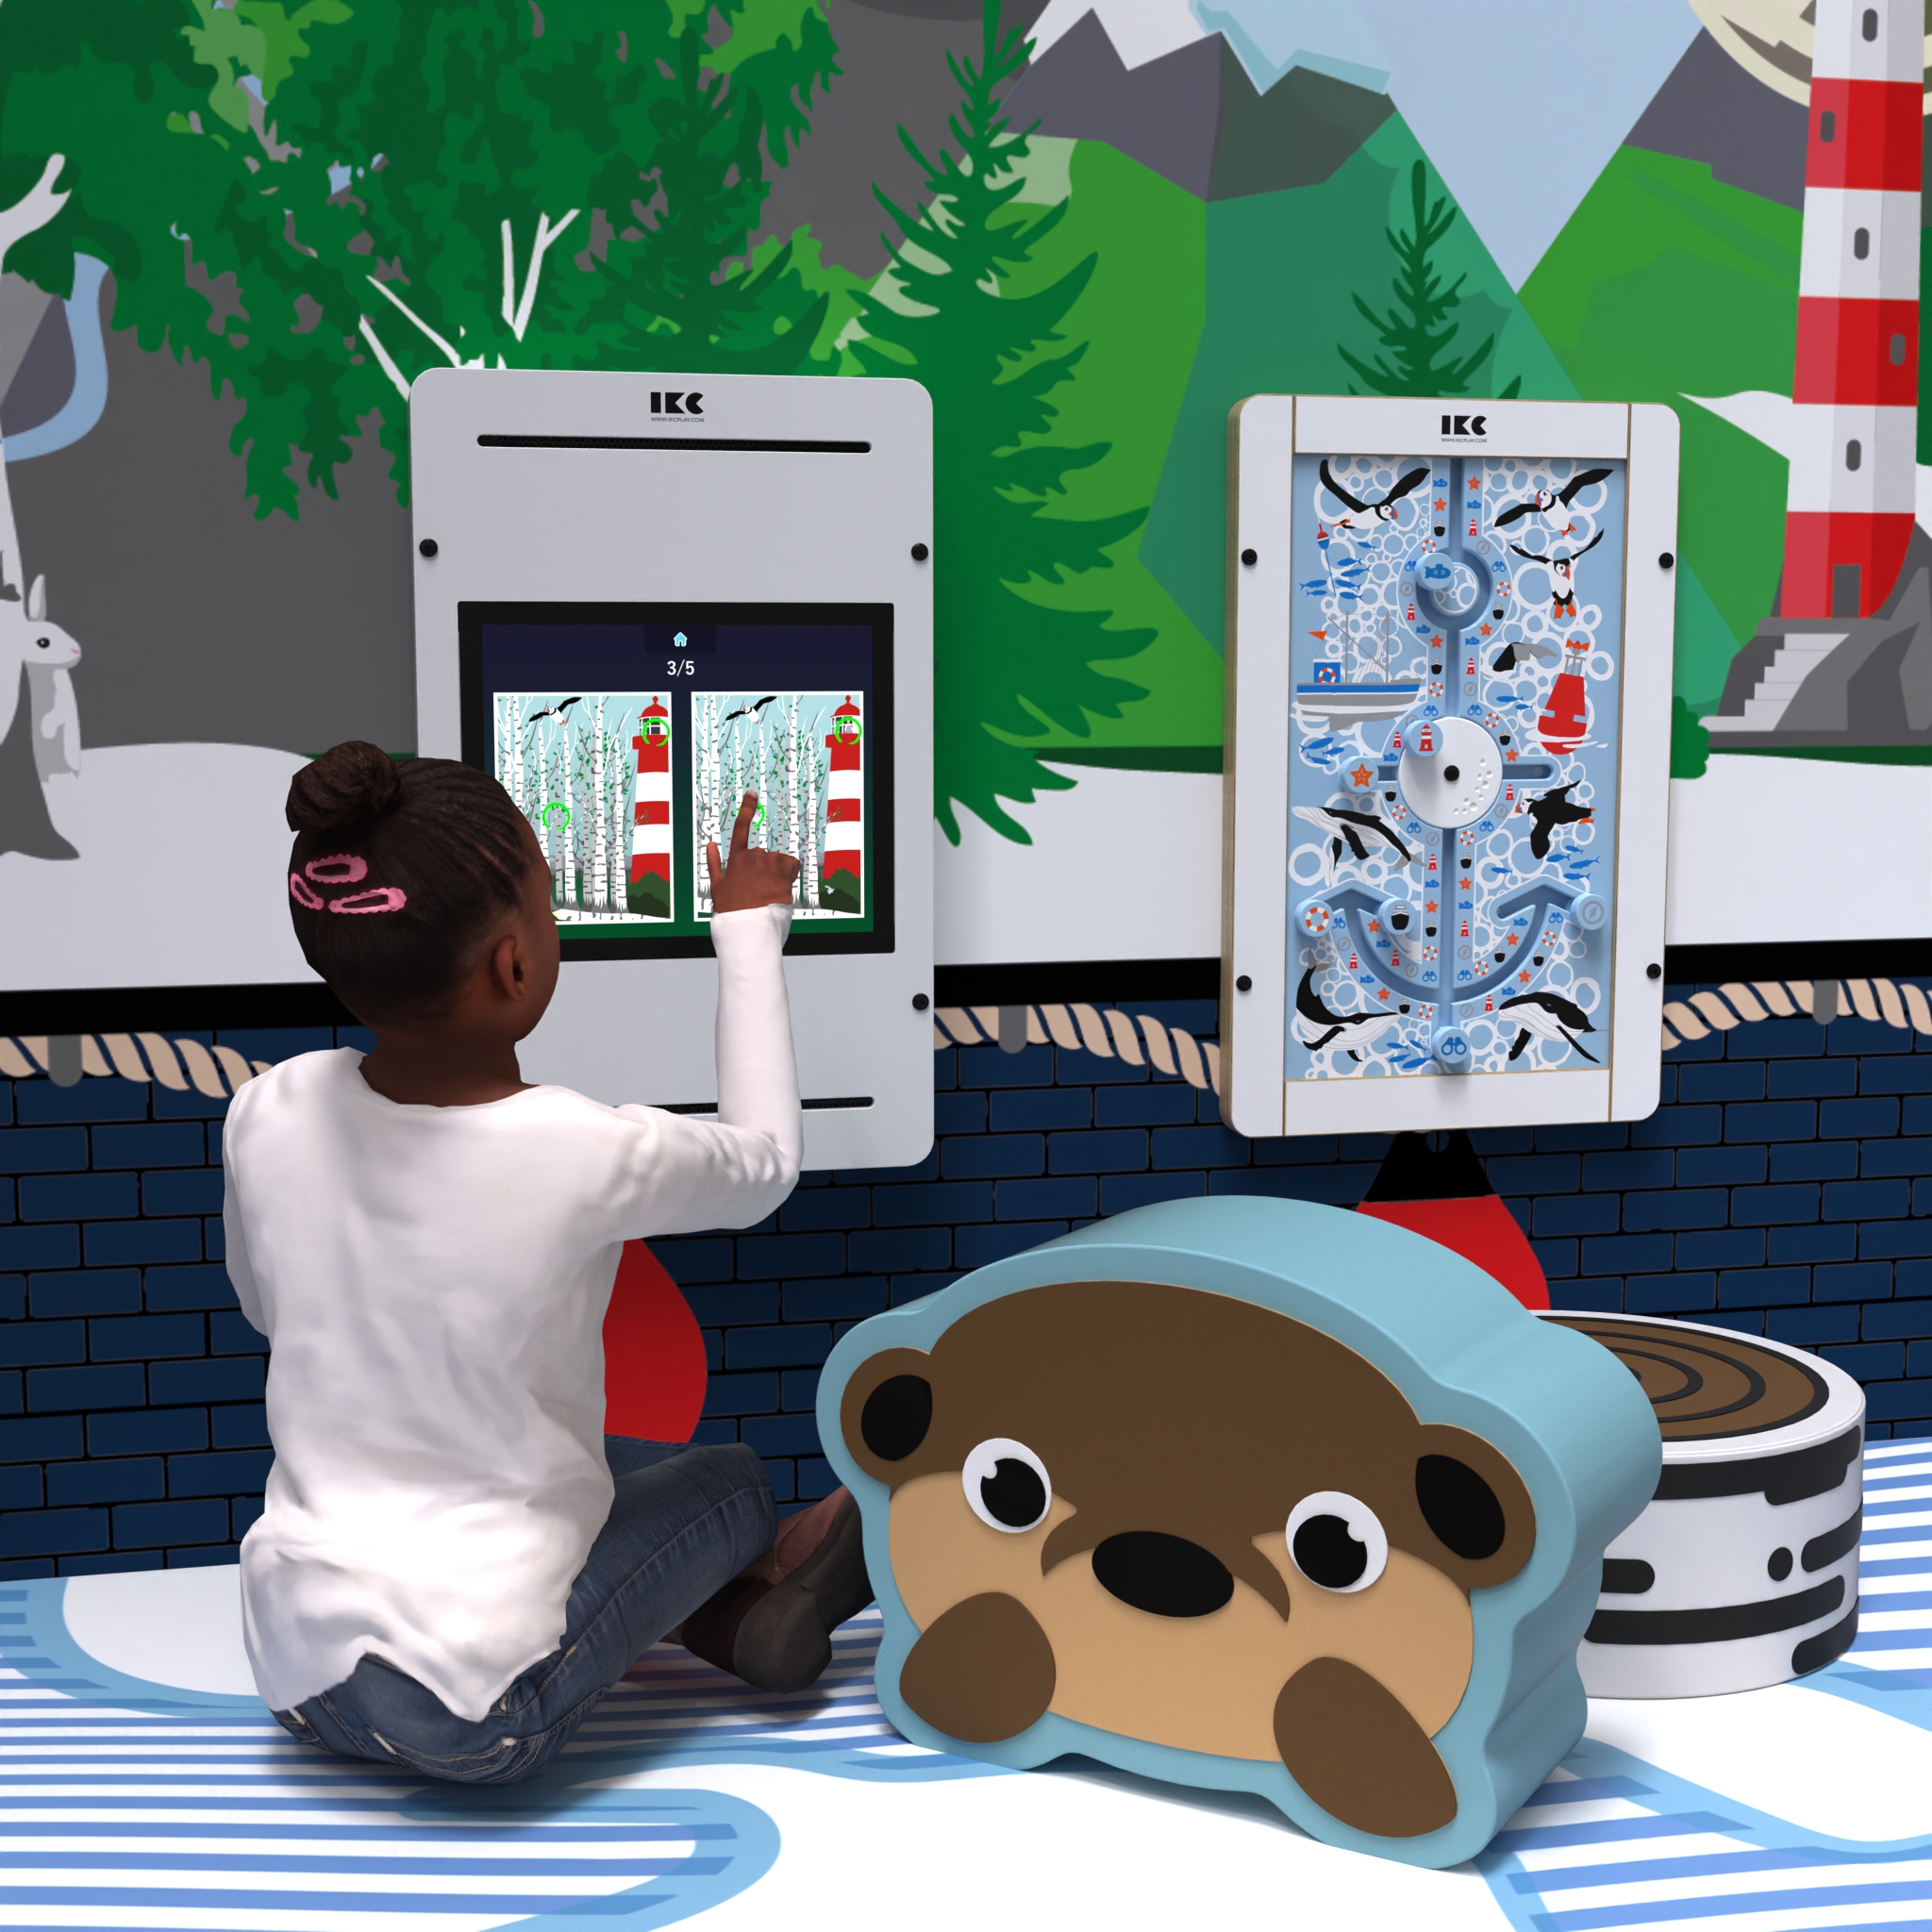 This image shows an kids corner Arctic S 2 m²